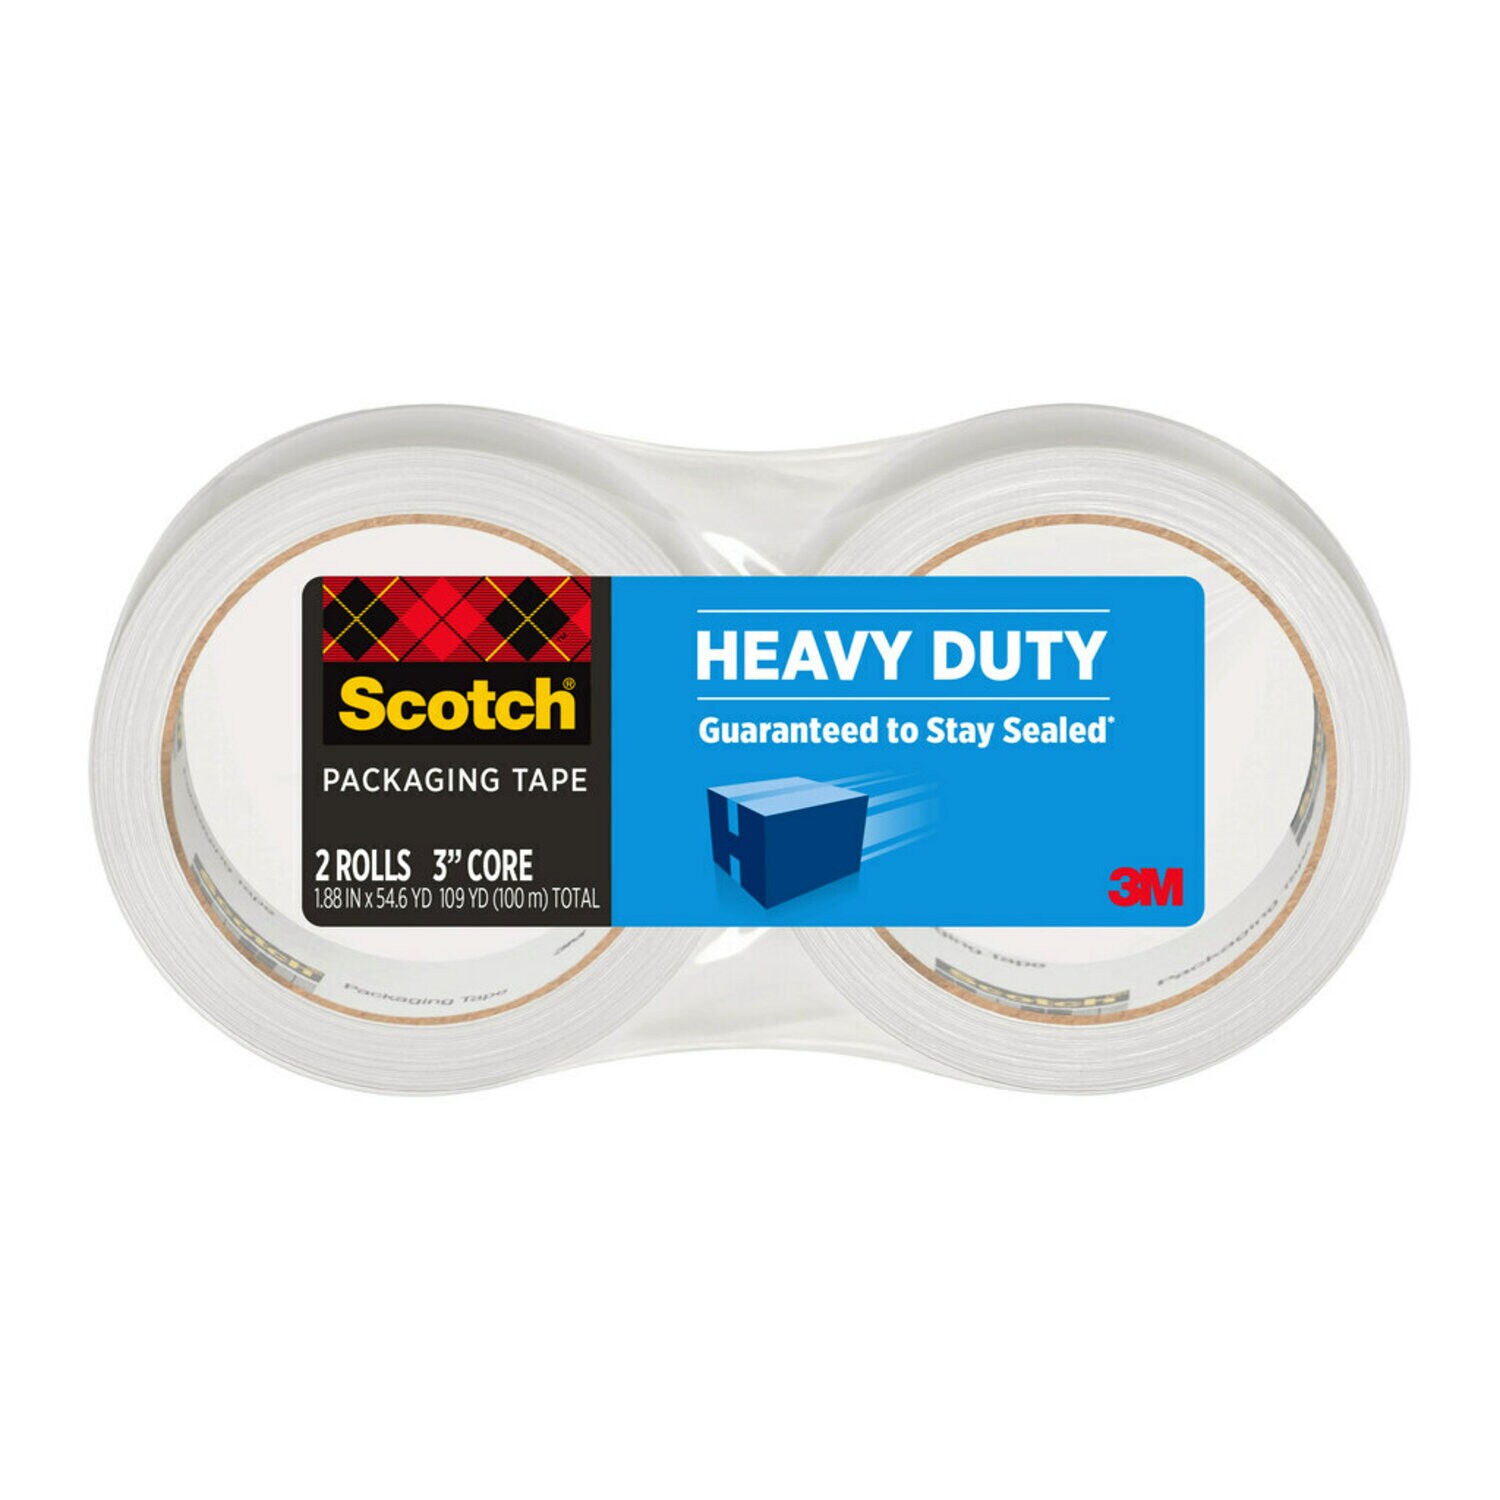 7100157930 - Scotch Heavy Duty Shipping Packaging Tape, 3850-2, 1.88 in x 54.6 yd
(48 mm x 50 m), 2 Pack